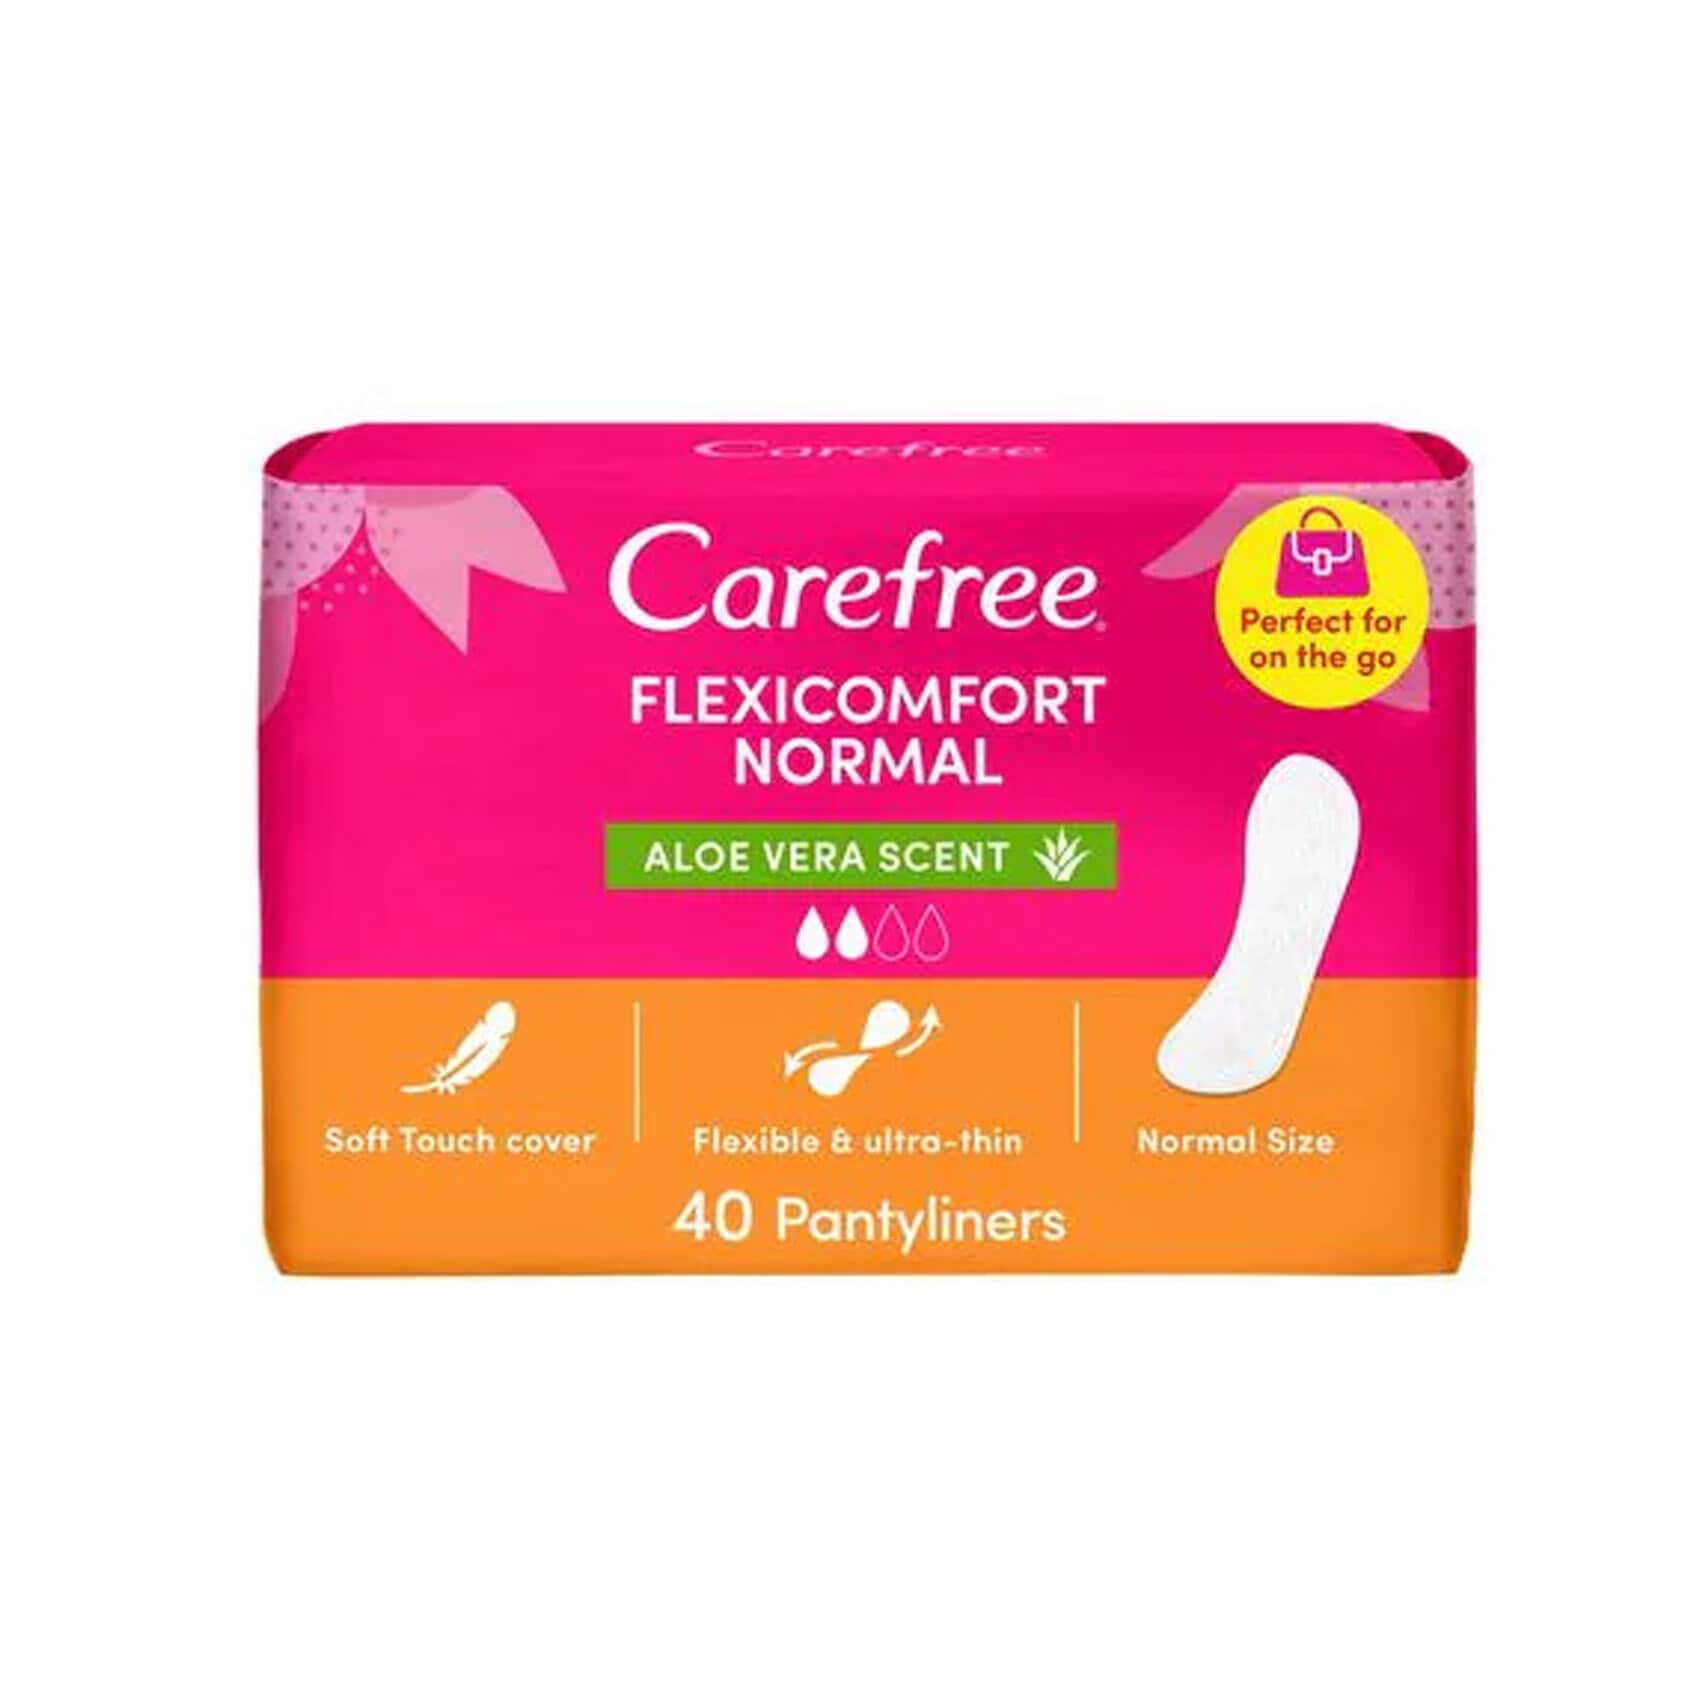 Carefree Flexi Comfort Panty Liners Cotton Ultra Thin Pads - 40 Pieces